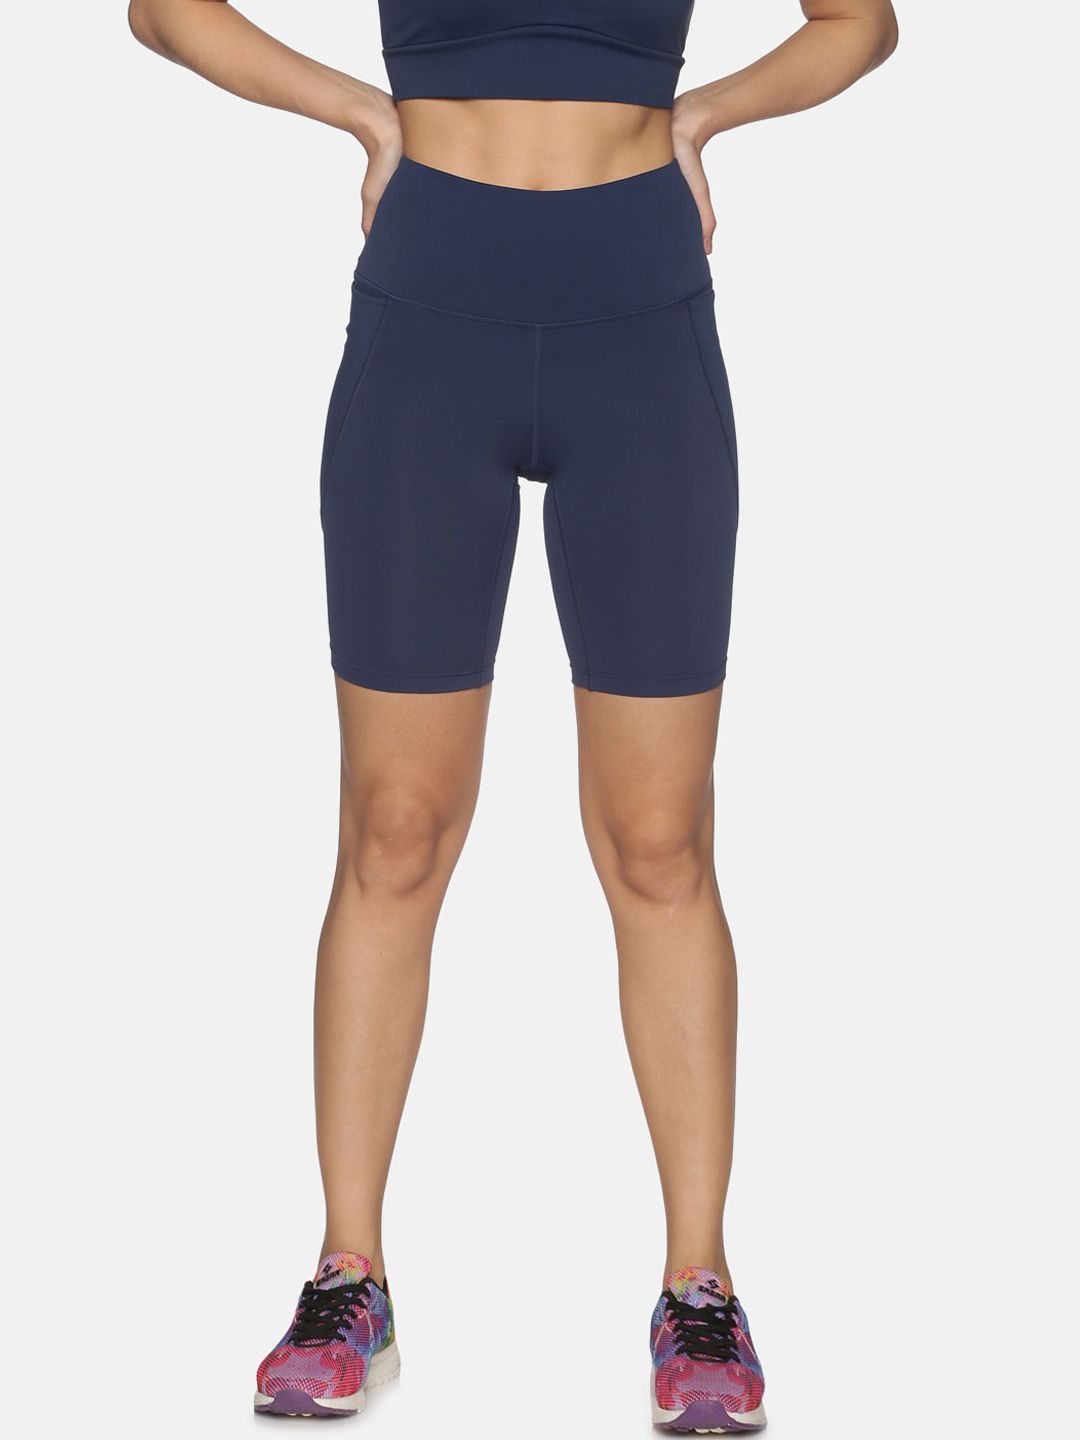 BlissClub Women Navy Blue High Waist The Ultimate Cycling Shorts Price in India